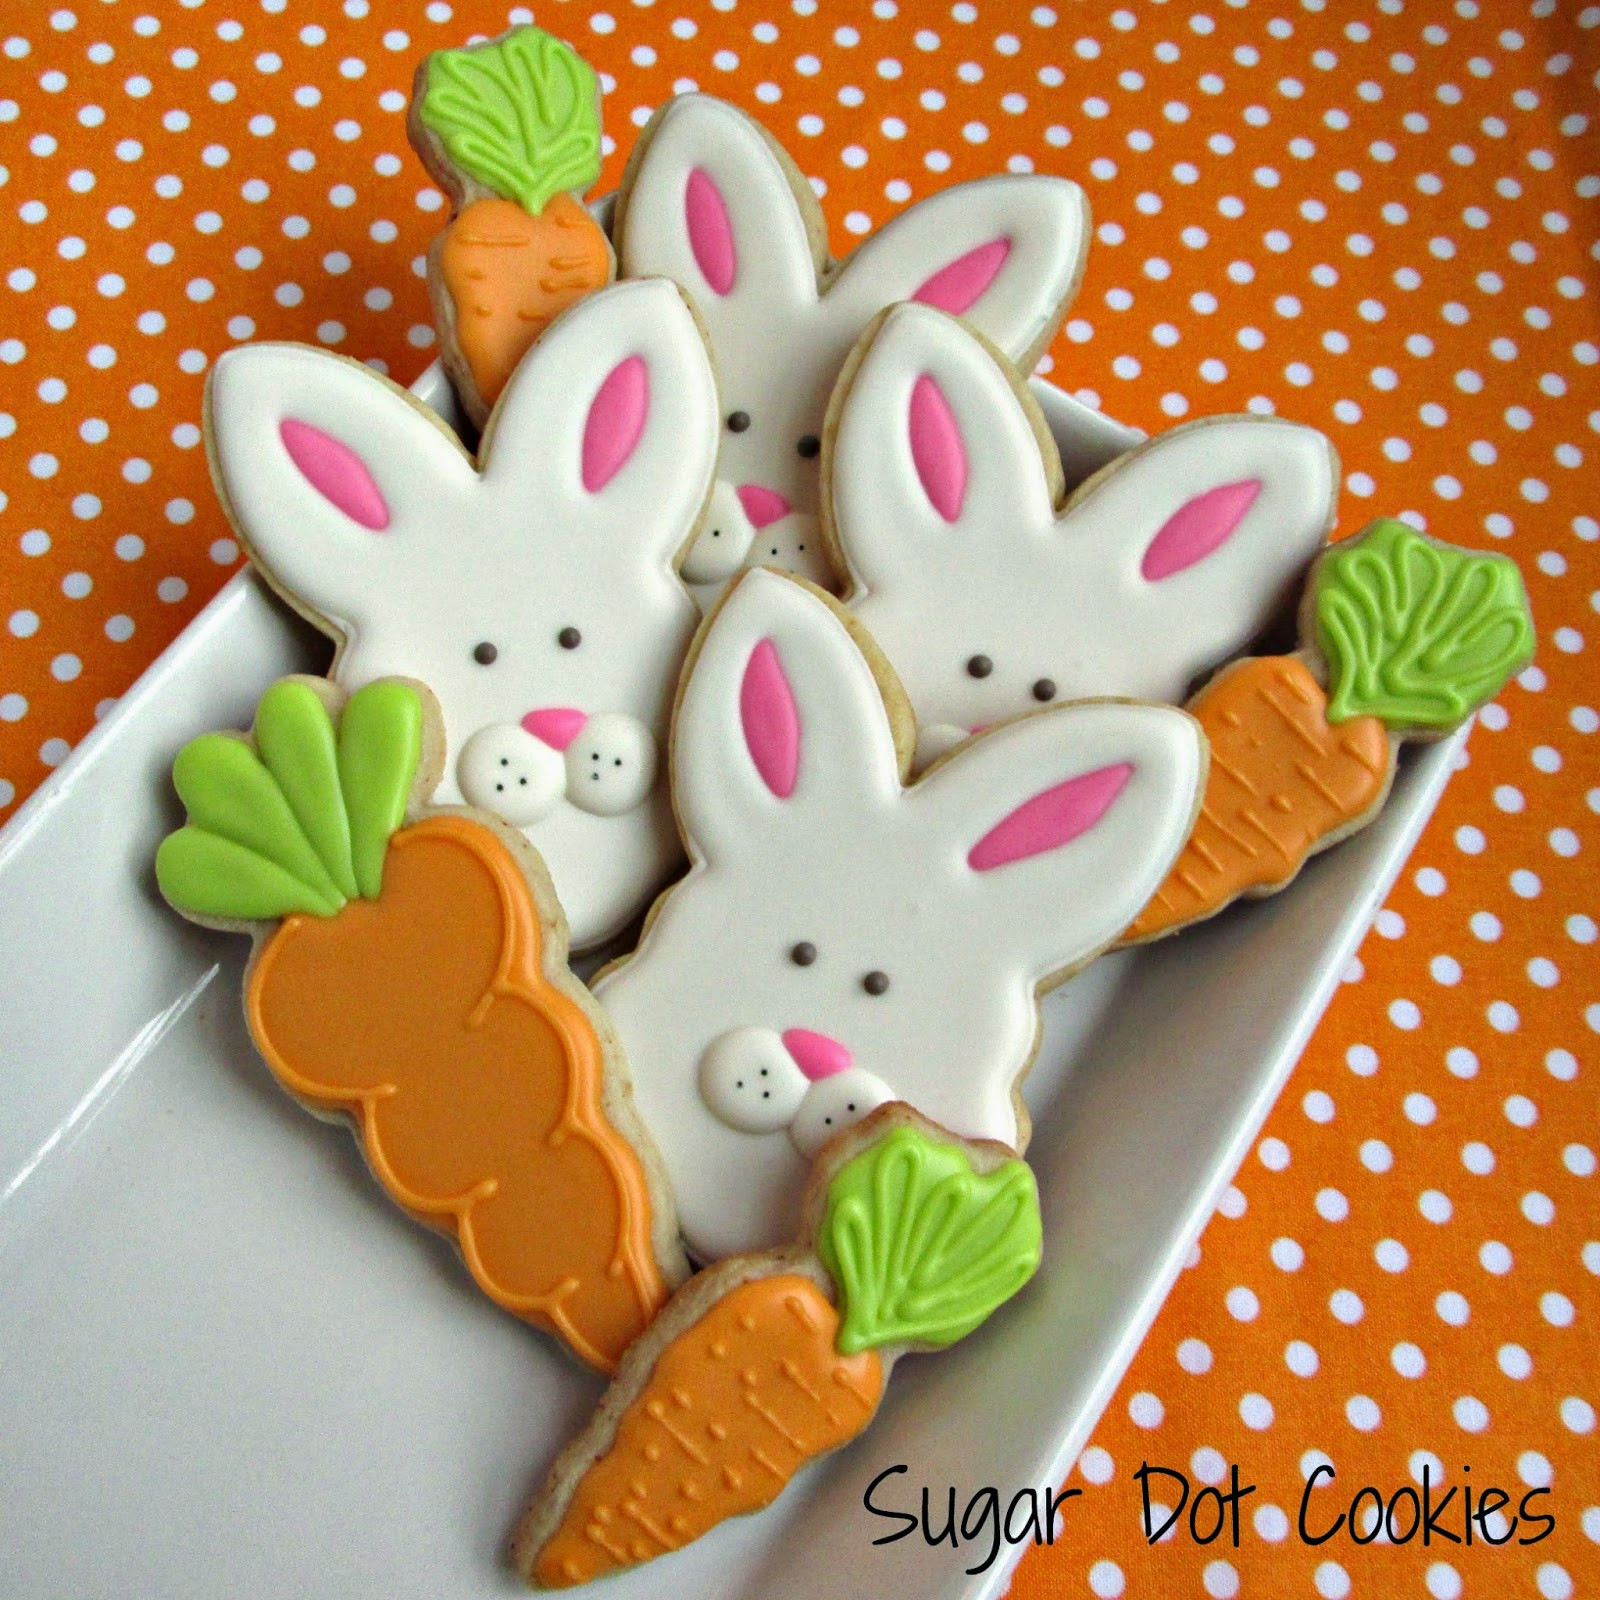 Easter Bunny Sugar Cookies
 I decided to play around with the bunny face cookies this